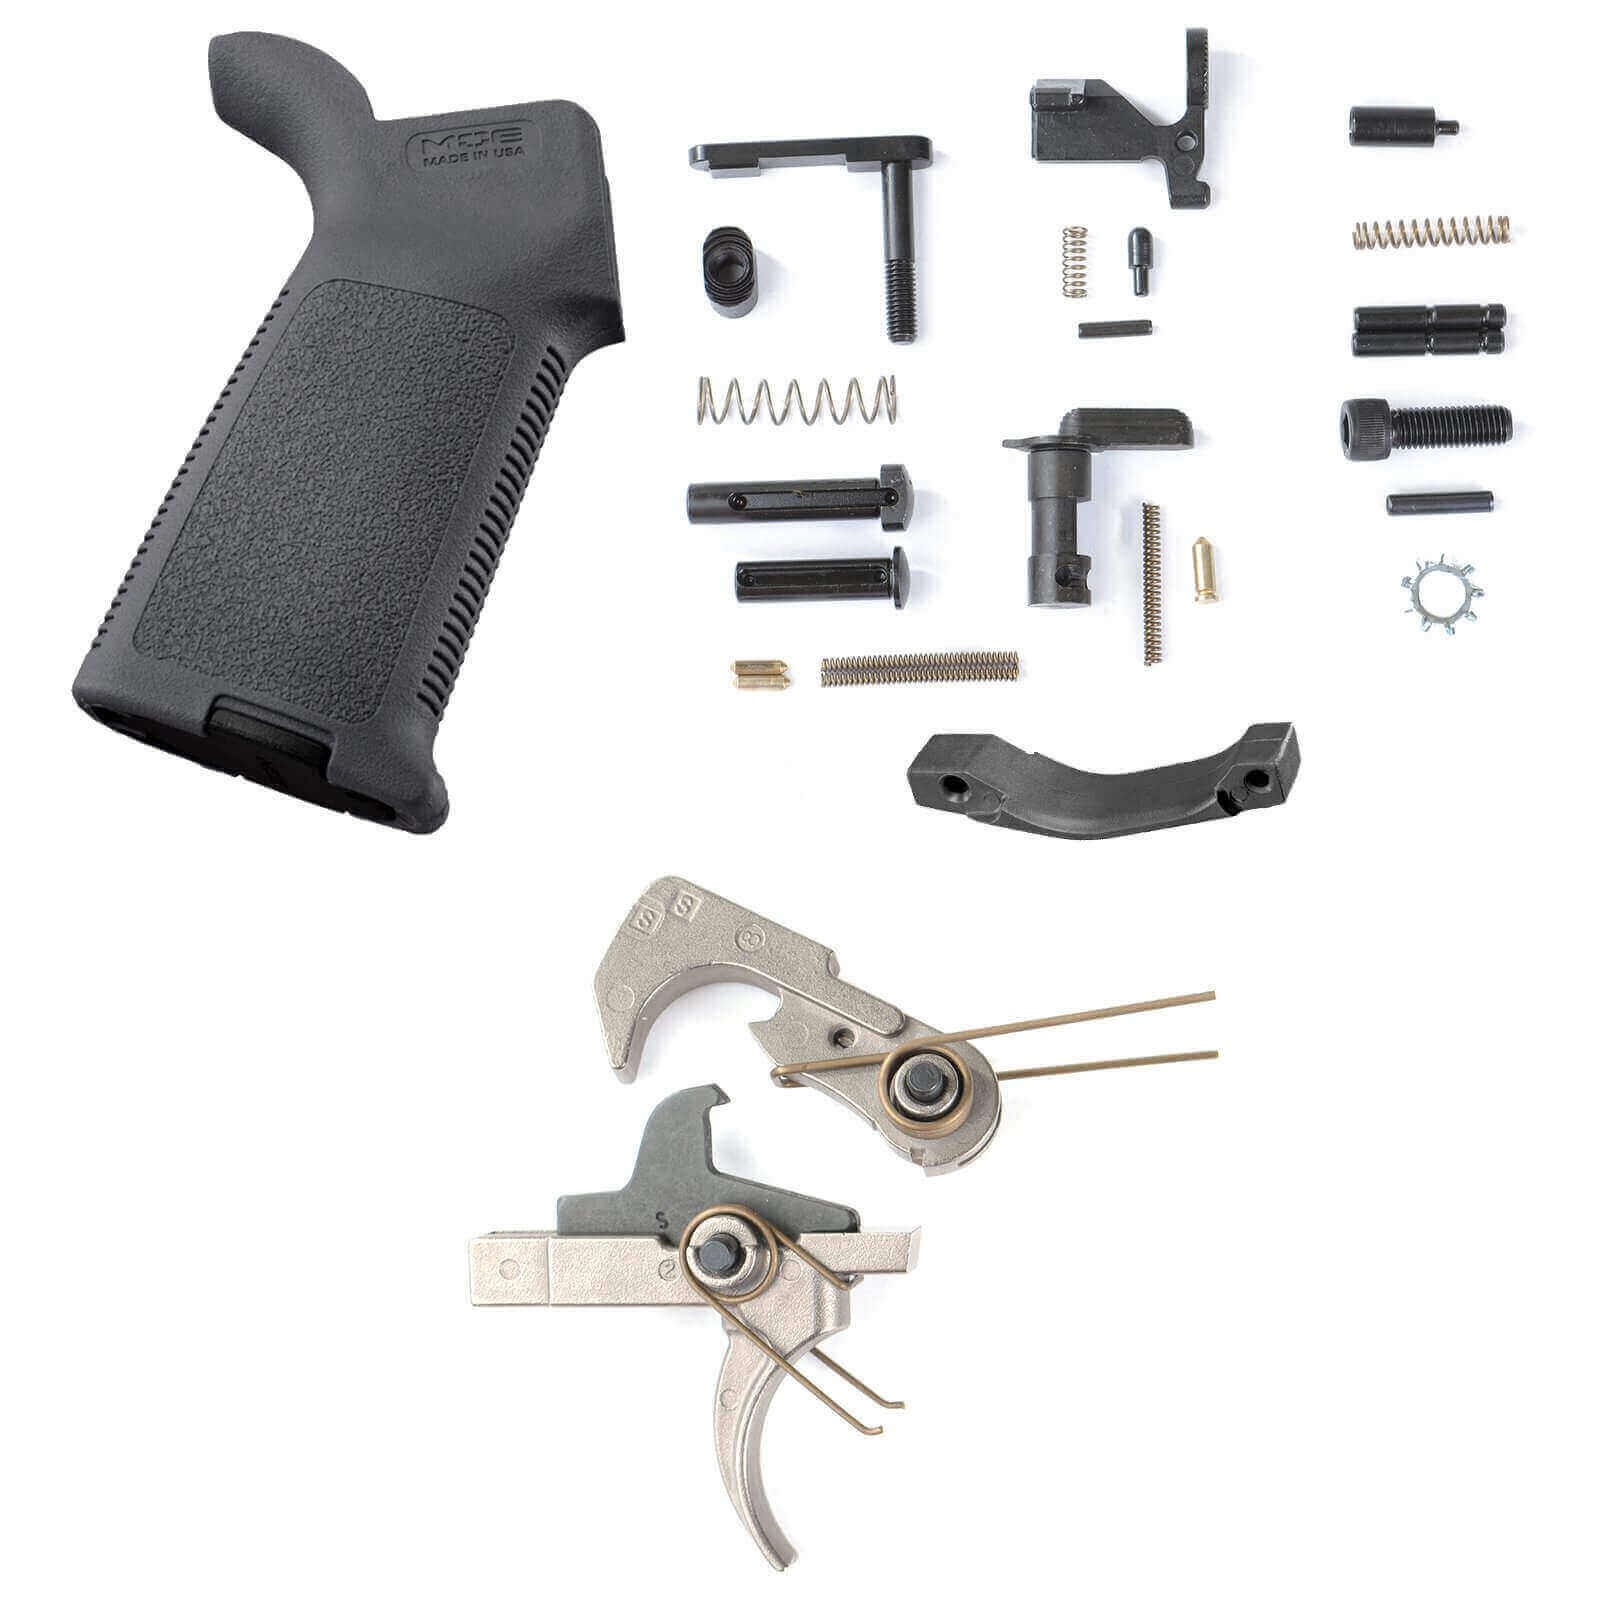 AT3™ Enhanced Lower Parts Kit with Nickel Teflon Trigger and Magpul MOE Grip for AR 15